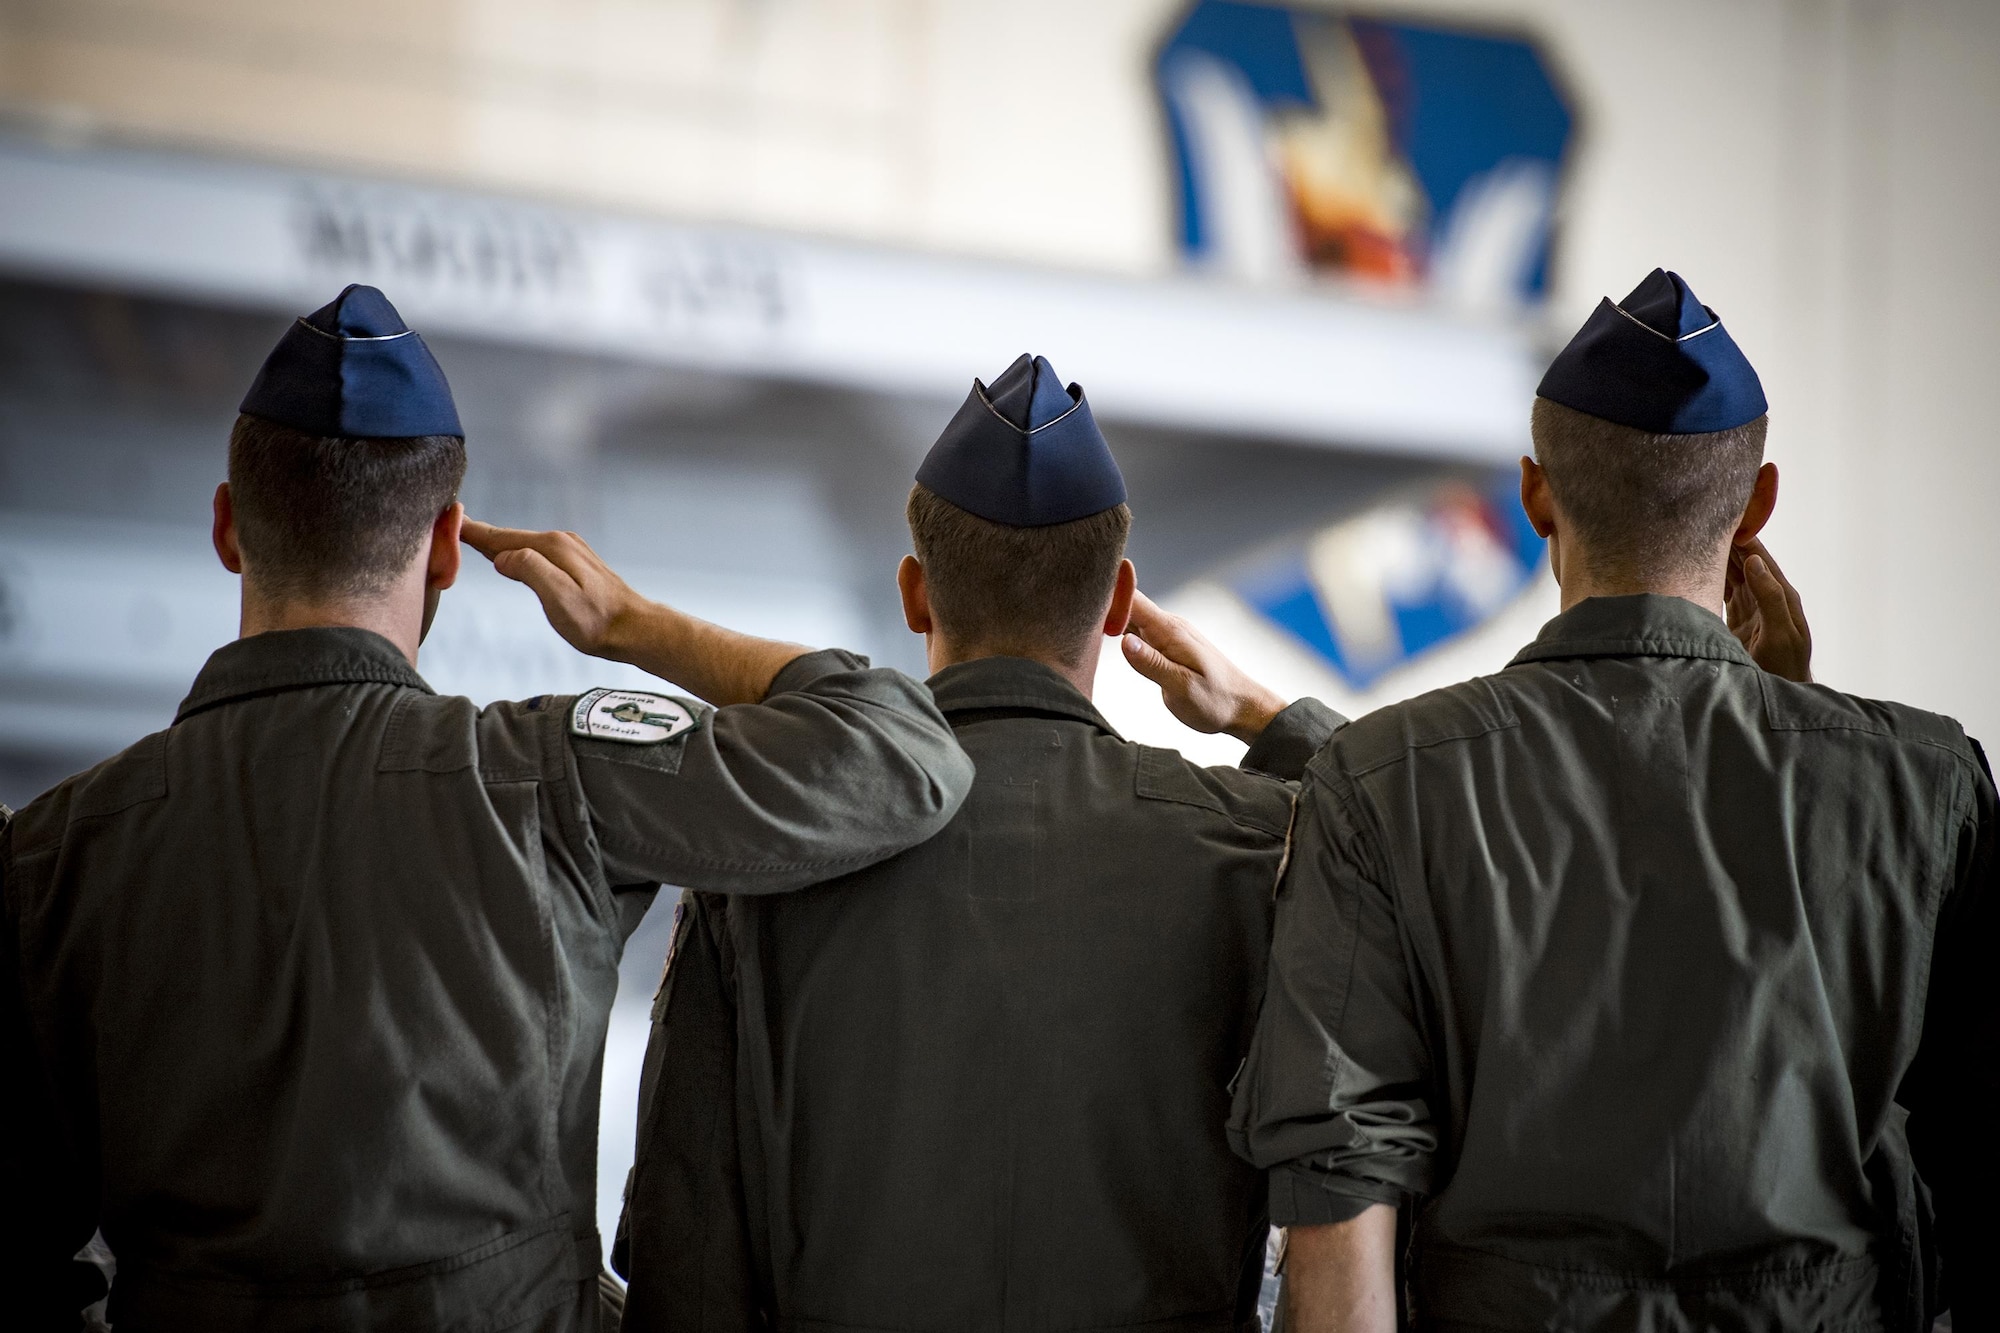 Airmen from the 41st Rescue Squadron salute during a change of command ceremony, July 10, 2017, at Moody Air Force Base, Ga. The change of command ceremony is a part of military history signifying the hand-off of responsibility of a unit from one commander to another. (U.S. Air Force photo by Staff Sgt. Ryan Callaghan)